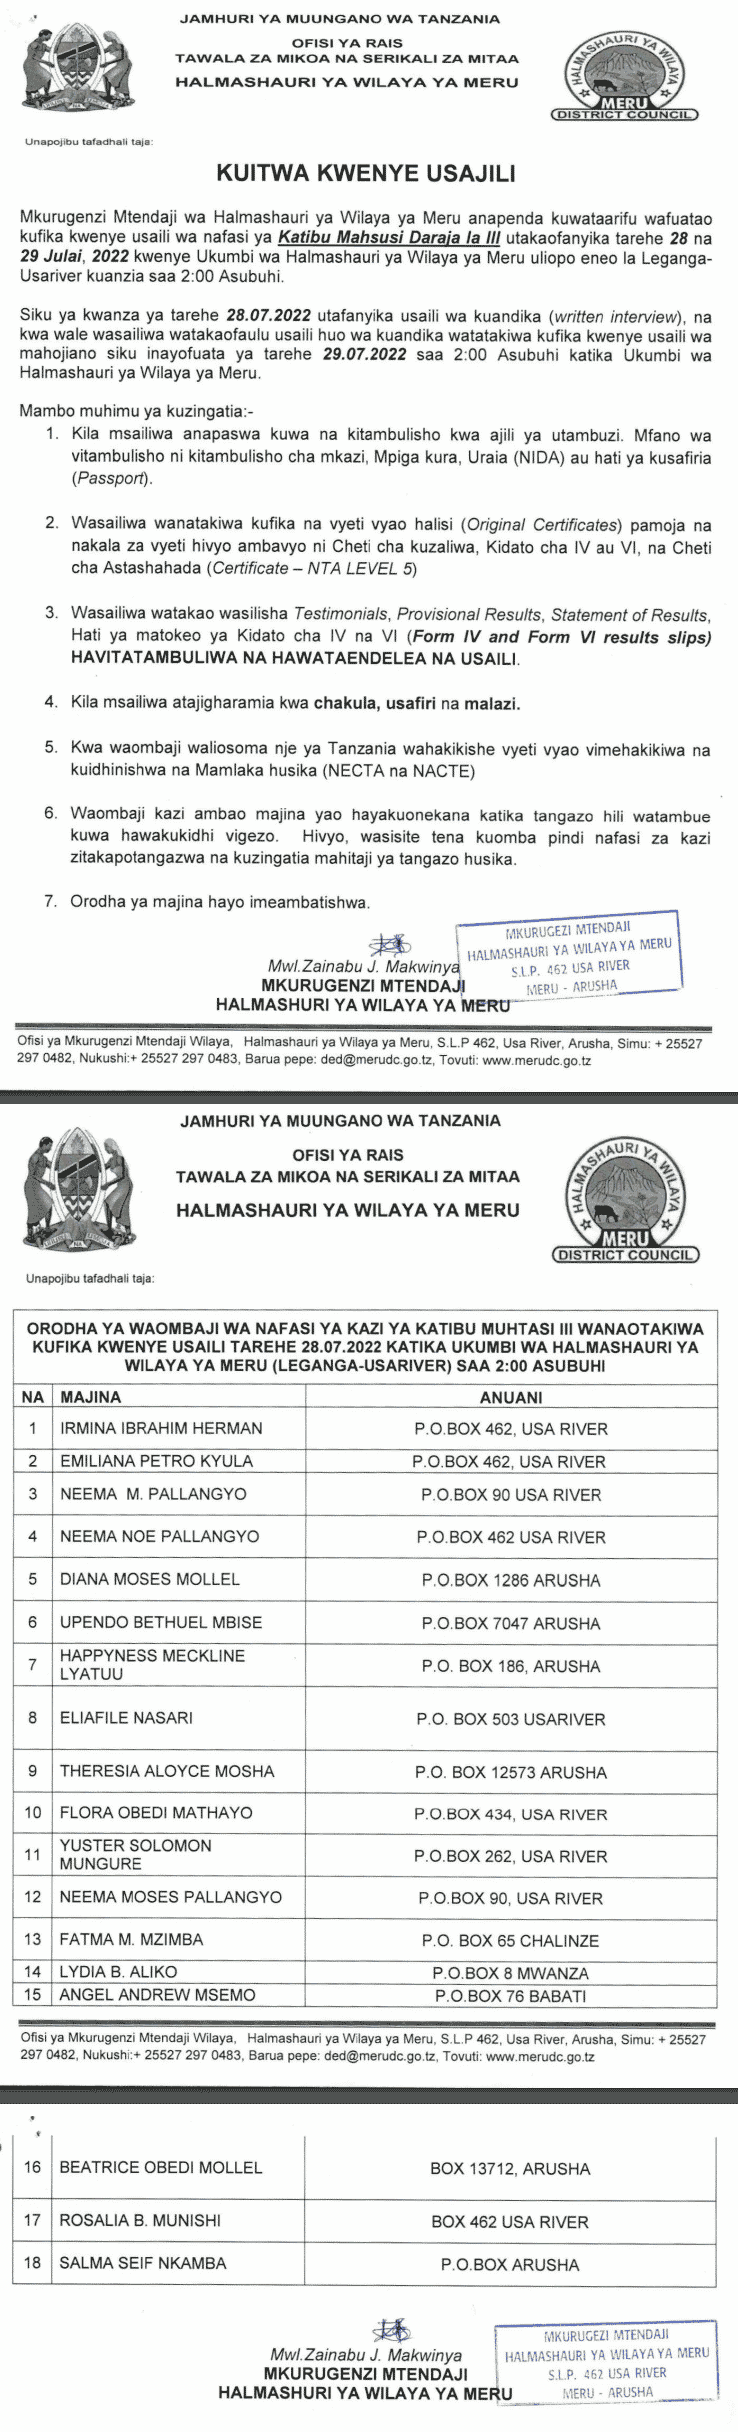 Names Called For Interview At Meru District Council _ 25 July 2022